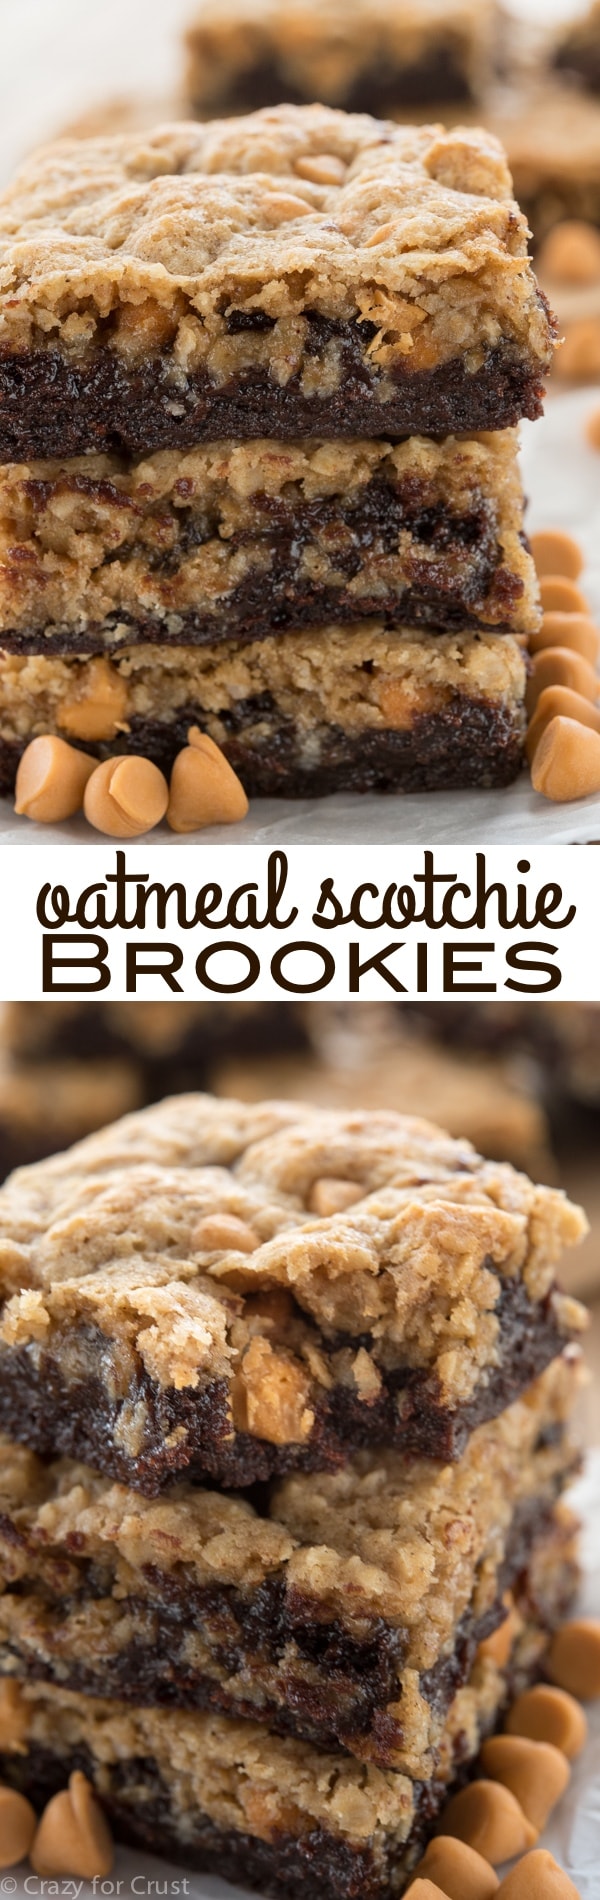 Oatmeal Scotchie Brookies: Brownies topped with Oatmeal Scotchie Cookies!